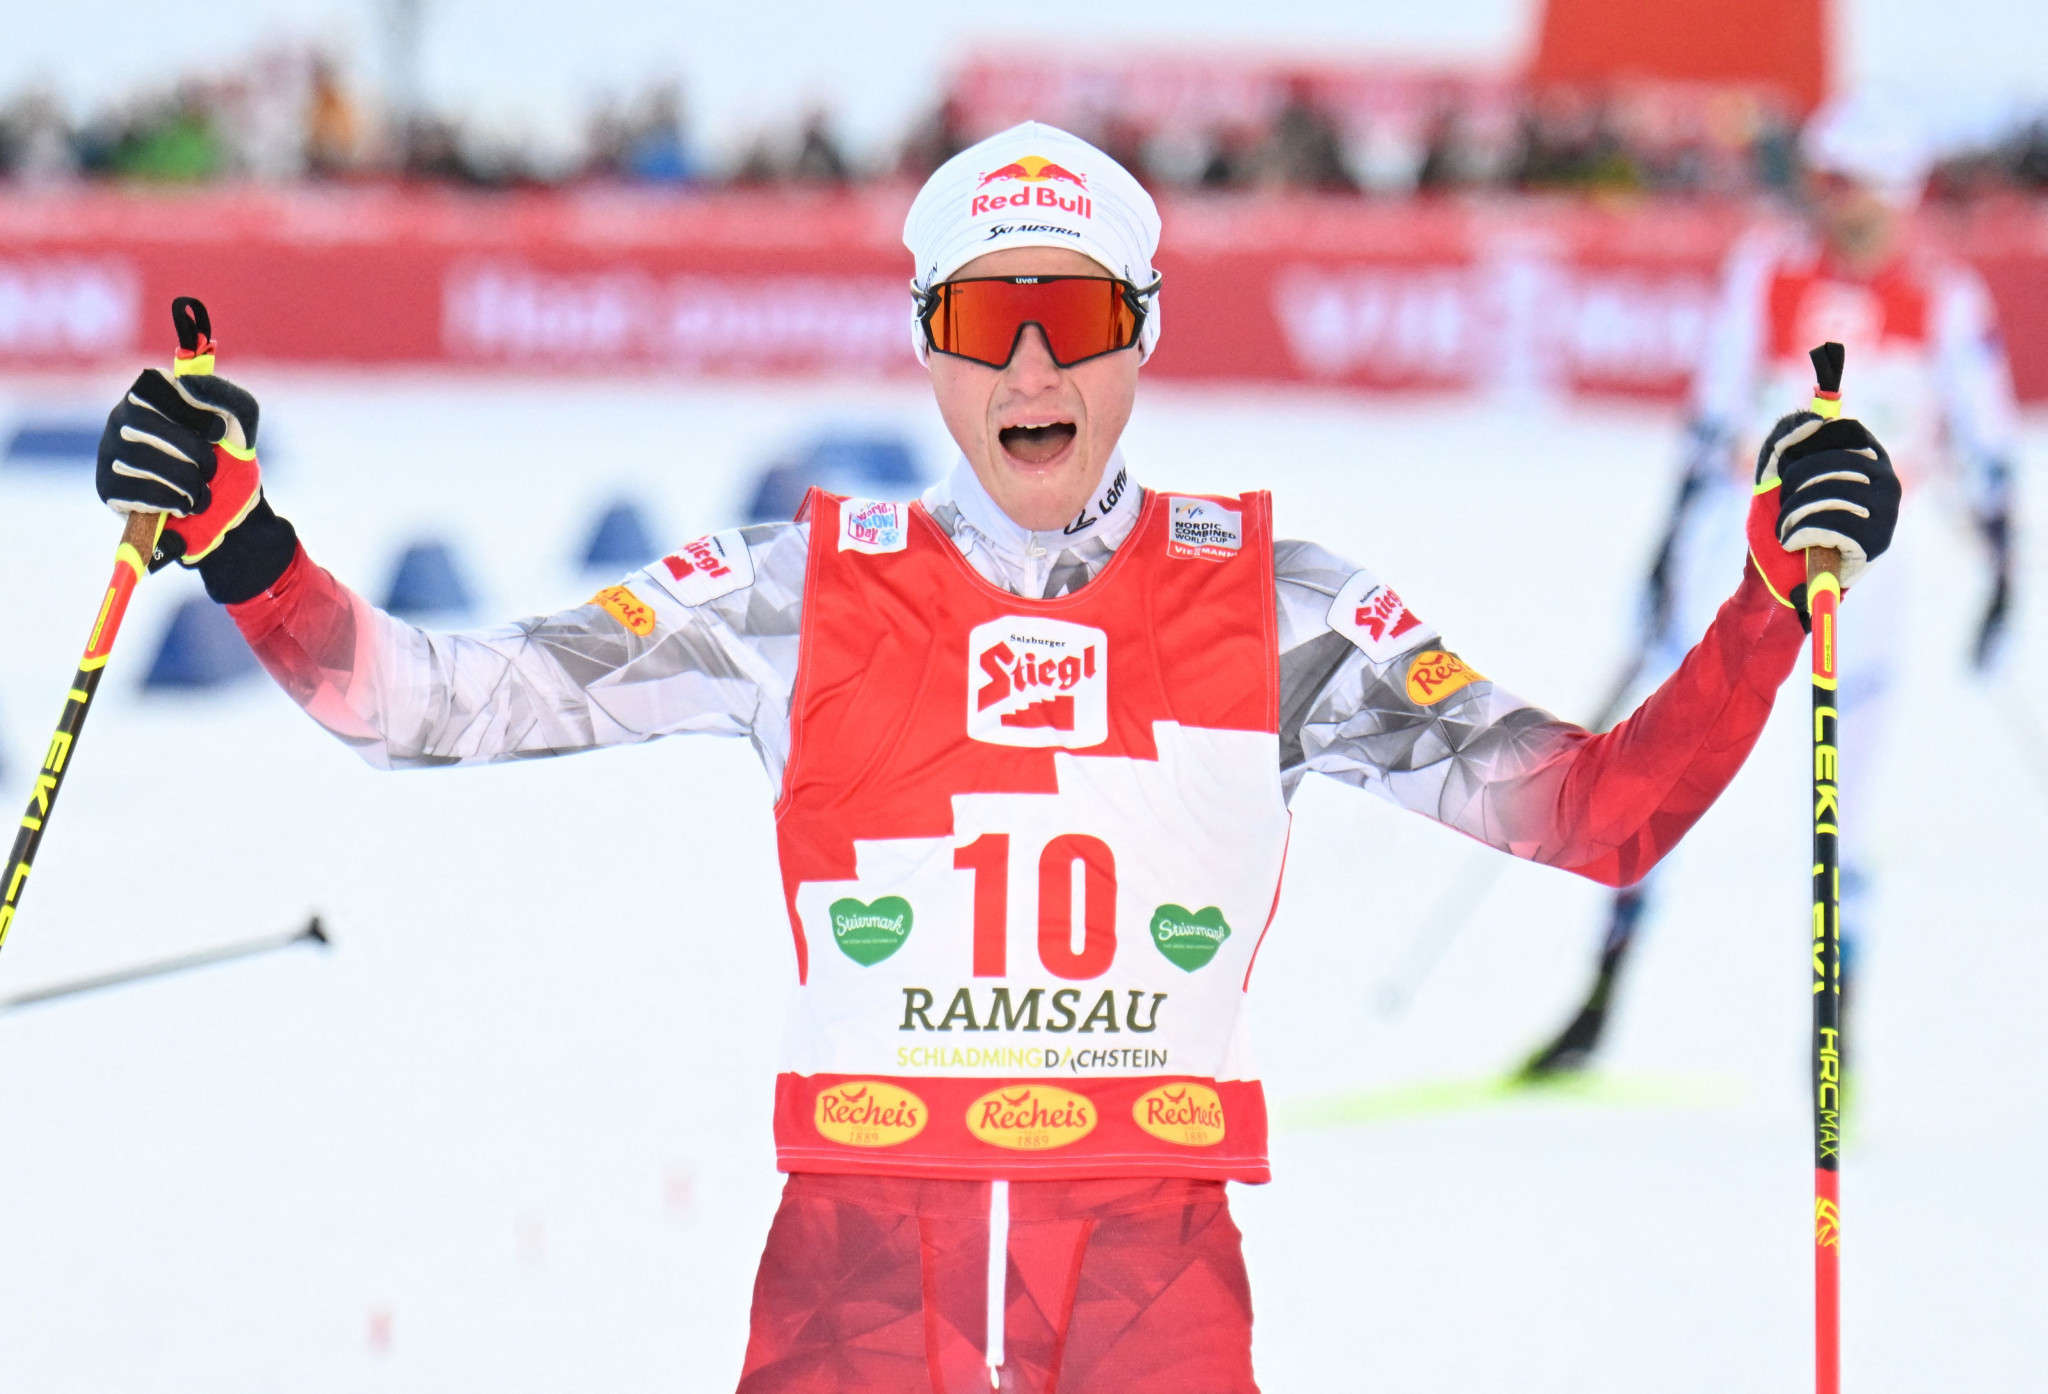 Lamparter wins Nordic Combined World Cup in Klingenthal after taking dramatic cross-country victory